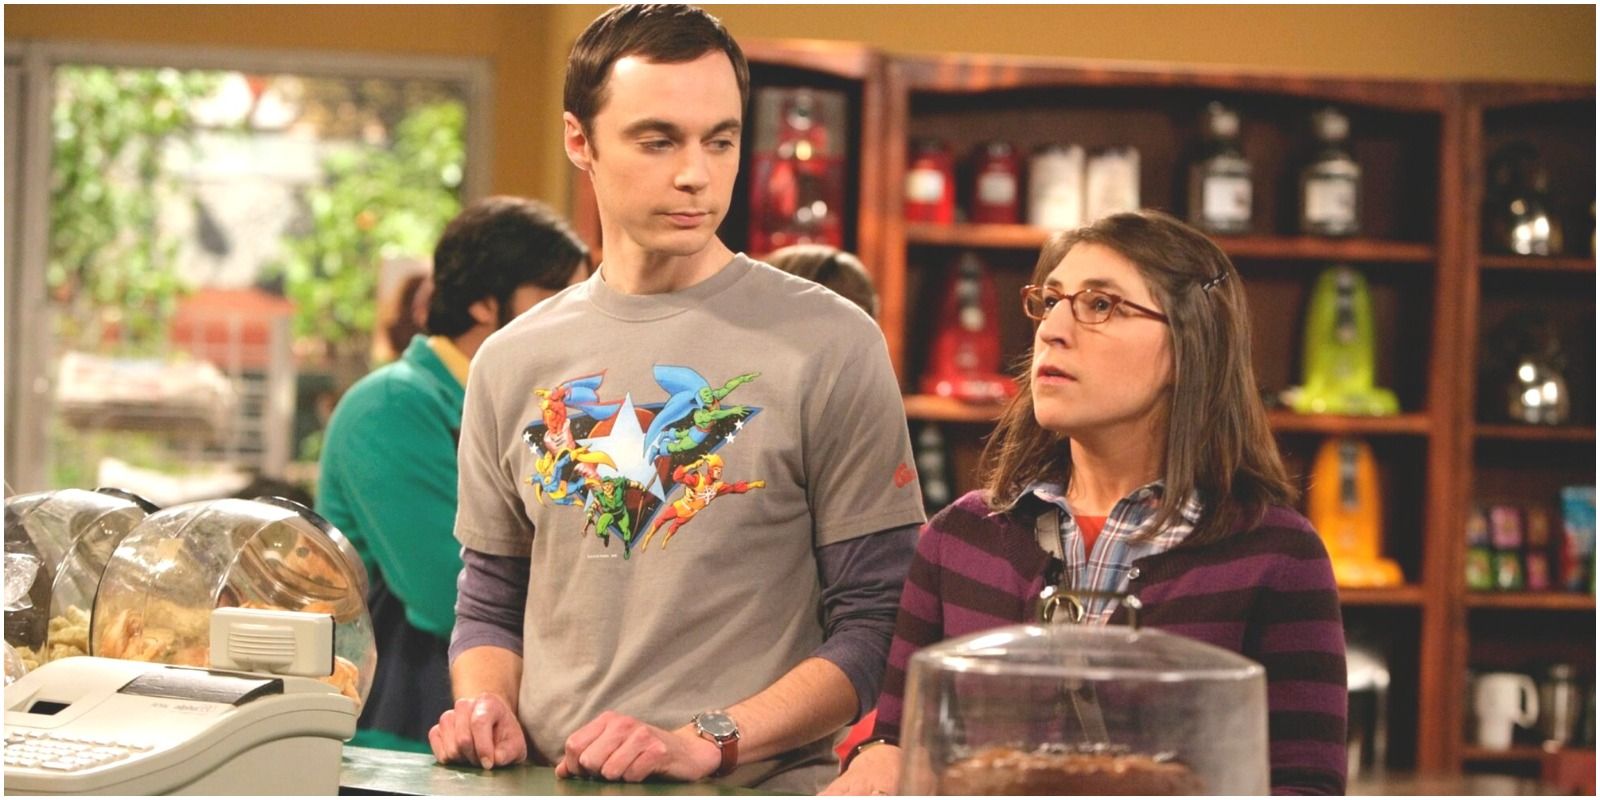 Raj and Howard setting Sheldon and Amy up for the first time from The Big Bang Theory